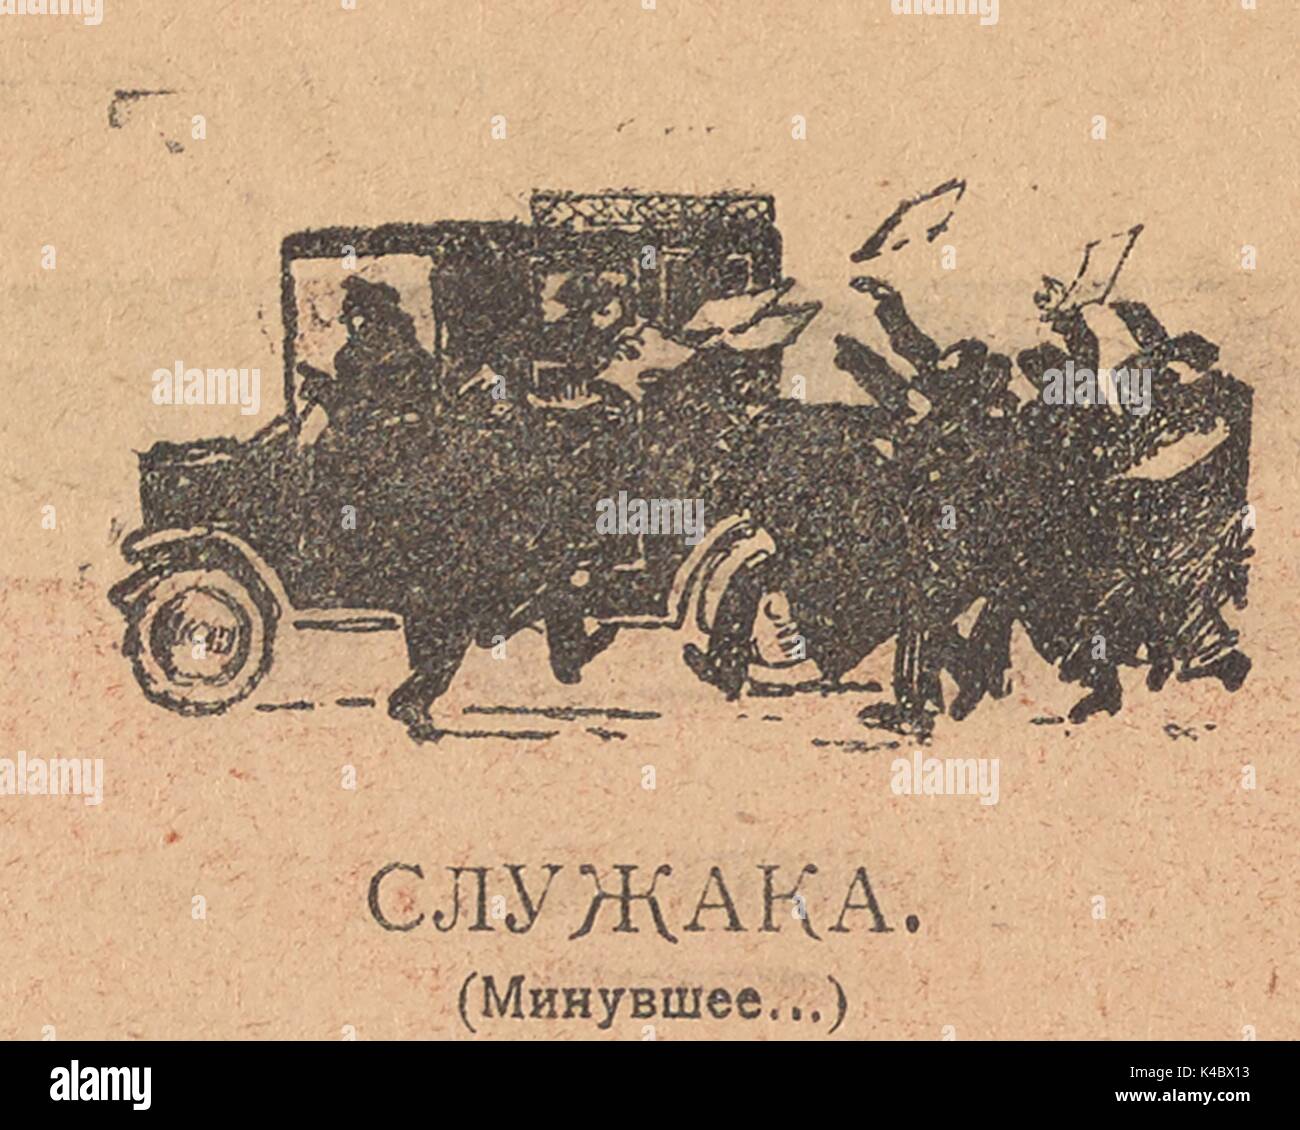 Cartoon from the Russian satirical journal Bich (Scourge) showing a crowd of people catching papers being thrown out of an automobile by a man in the back seat, with text reading, 'campaigner (former..)', 1917. Stock Photo